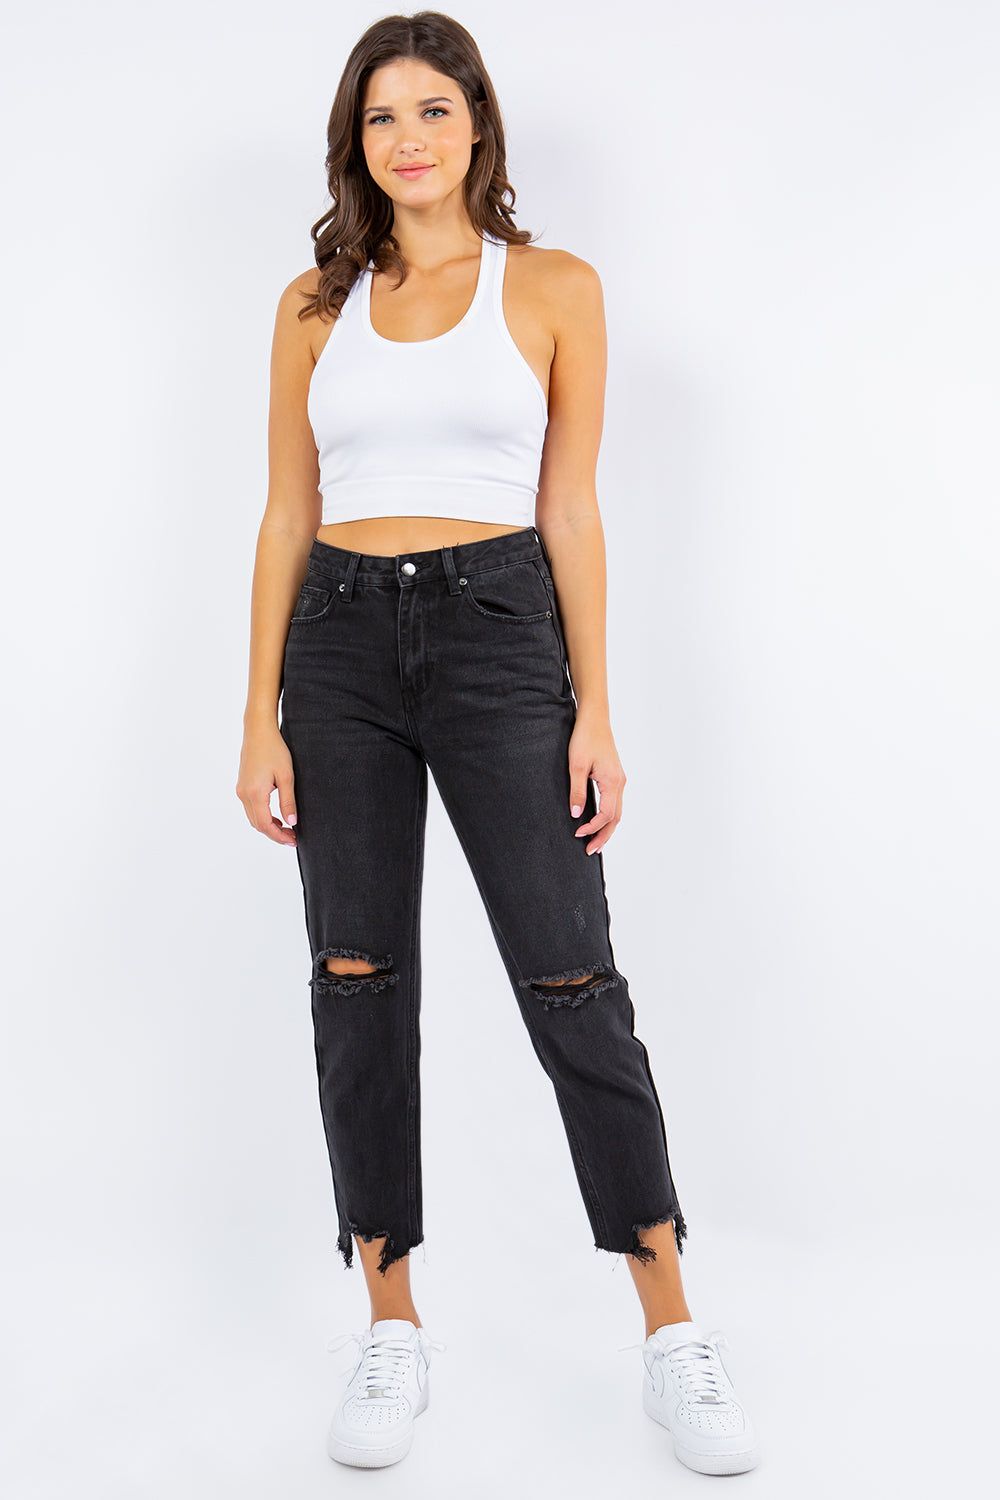 American Bazi High Waist Distressed Cropped Straight Jeans - us.meeeshop